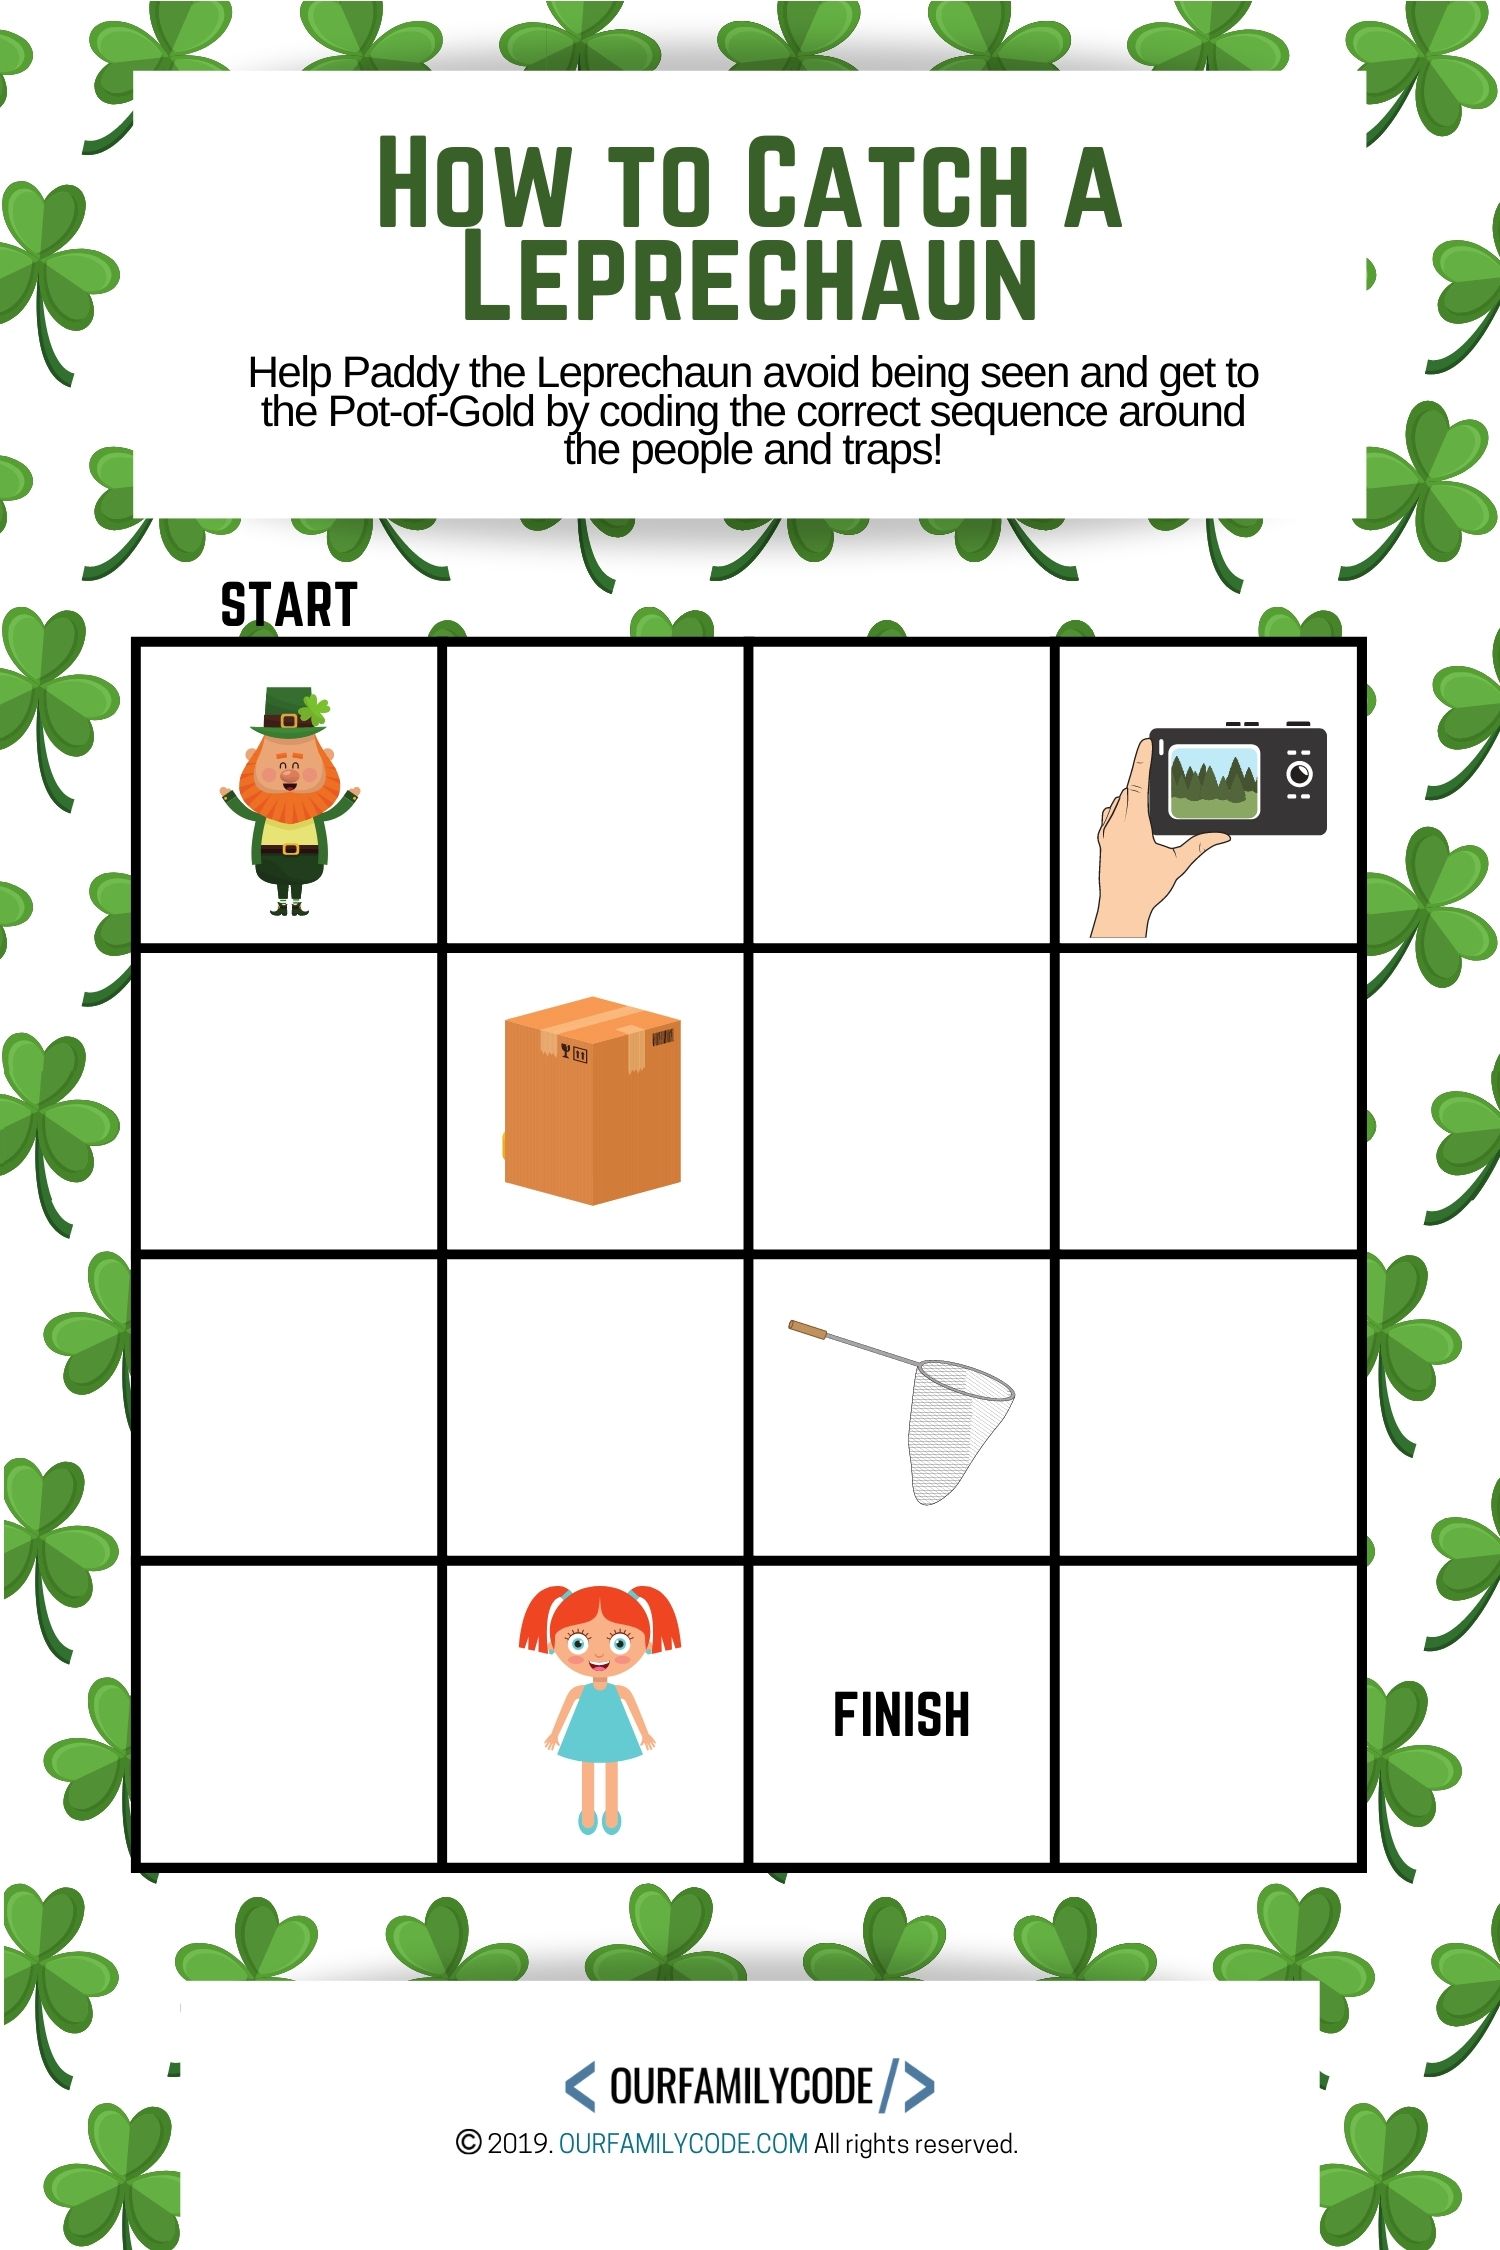 Help Paddy the Leprechaun avoid being caught by coding the sequence between the traps in this leprechaun sequence coding activity!! #teachkidstocode #freeworksheets #codingactivitiesforkids #STEM #STEAM #unpluggedcoding 